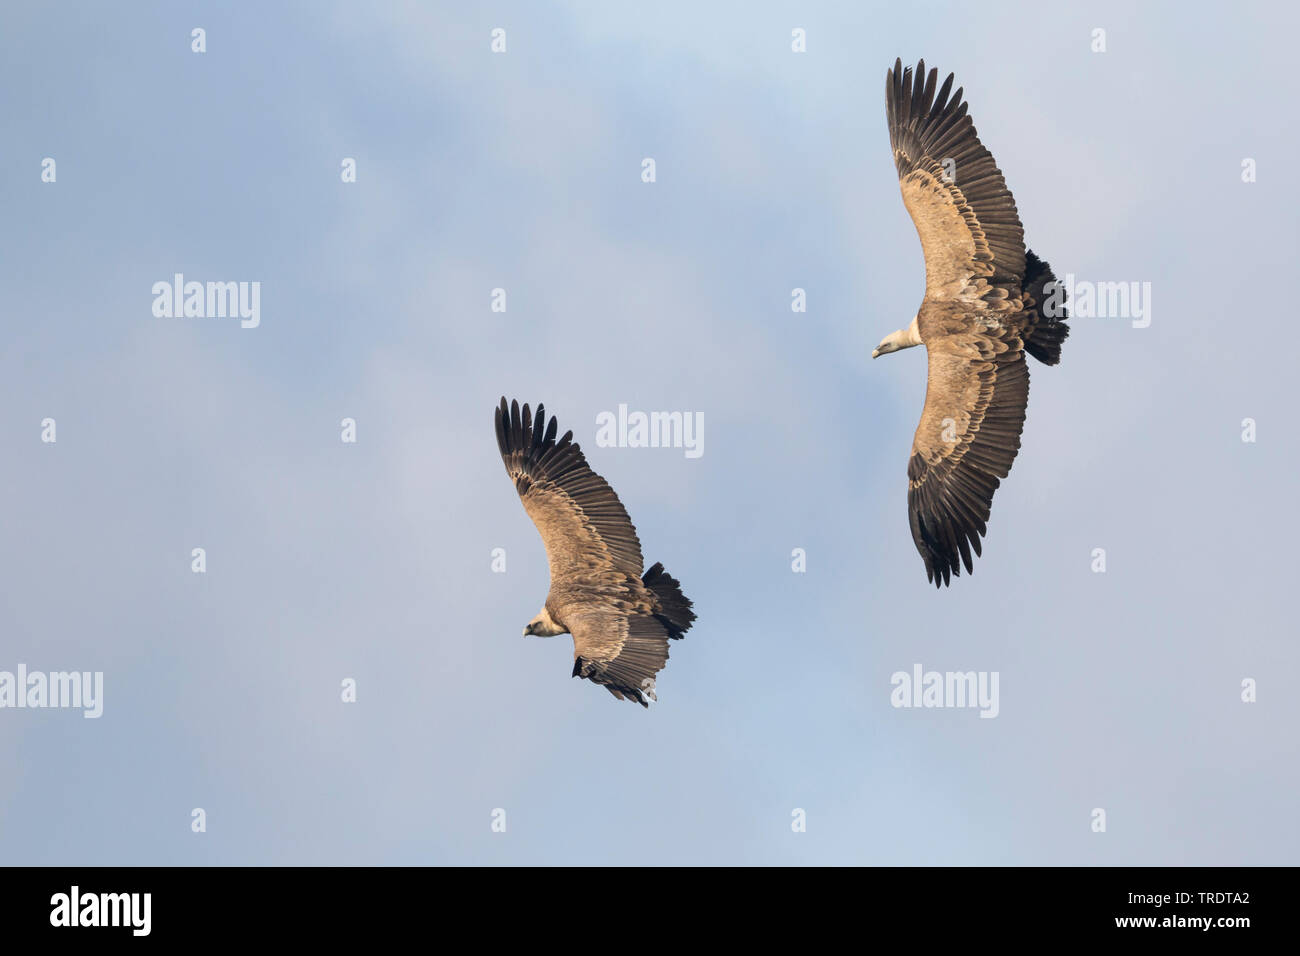 griffon vulture (Gyps fulvus), two vultures in flight, Spain Stock Photo